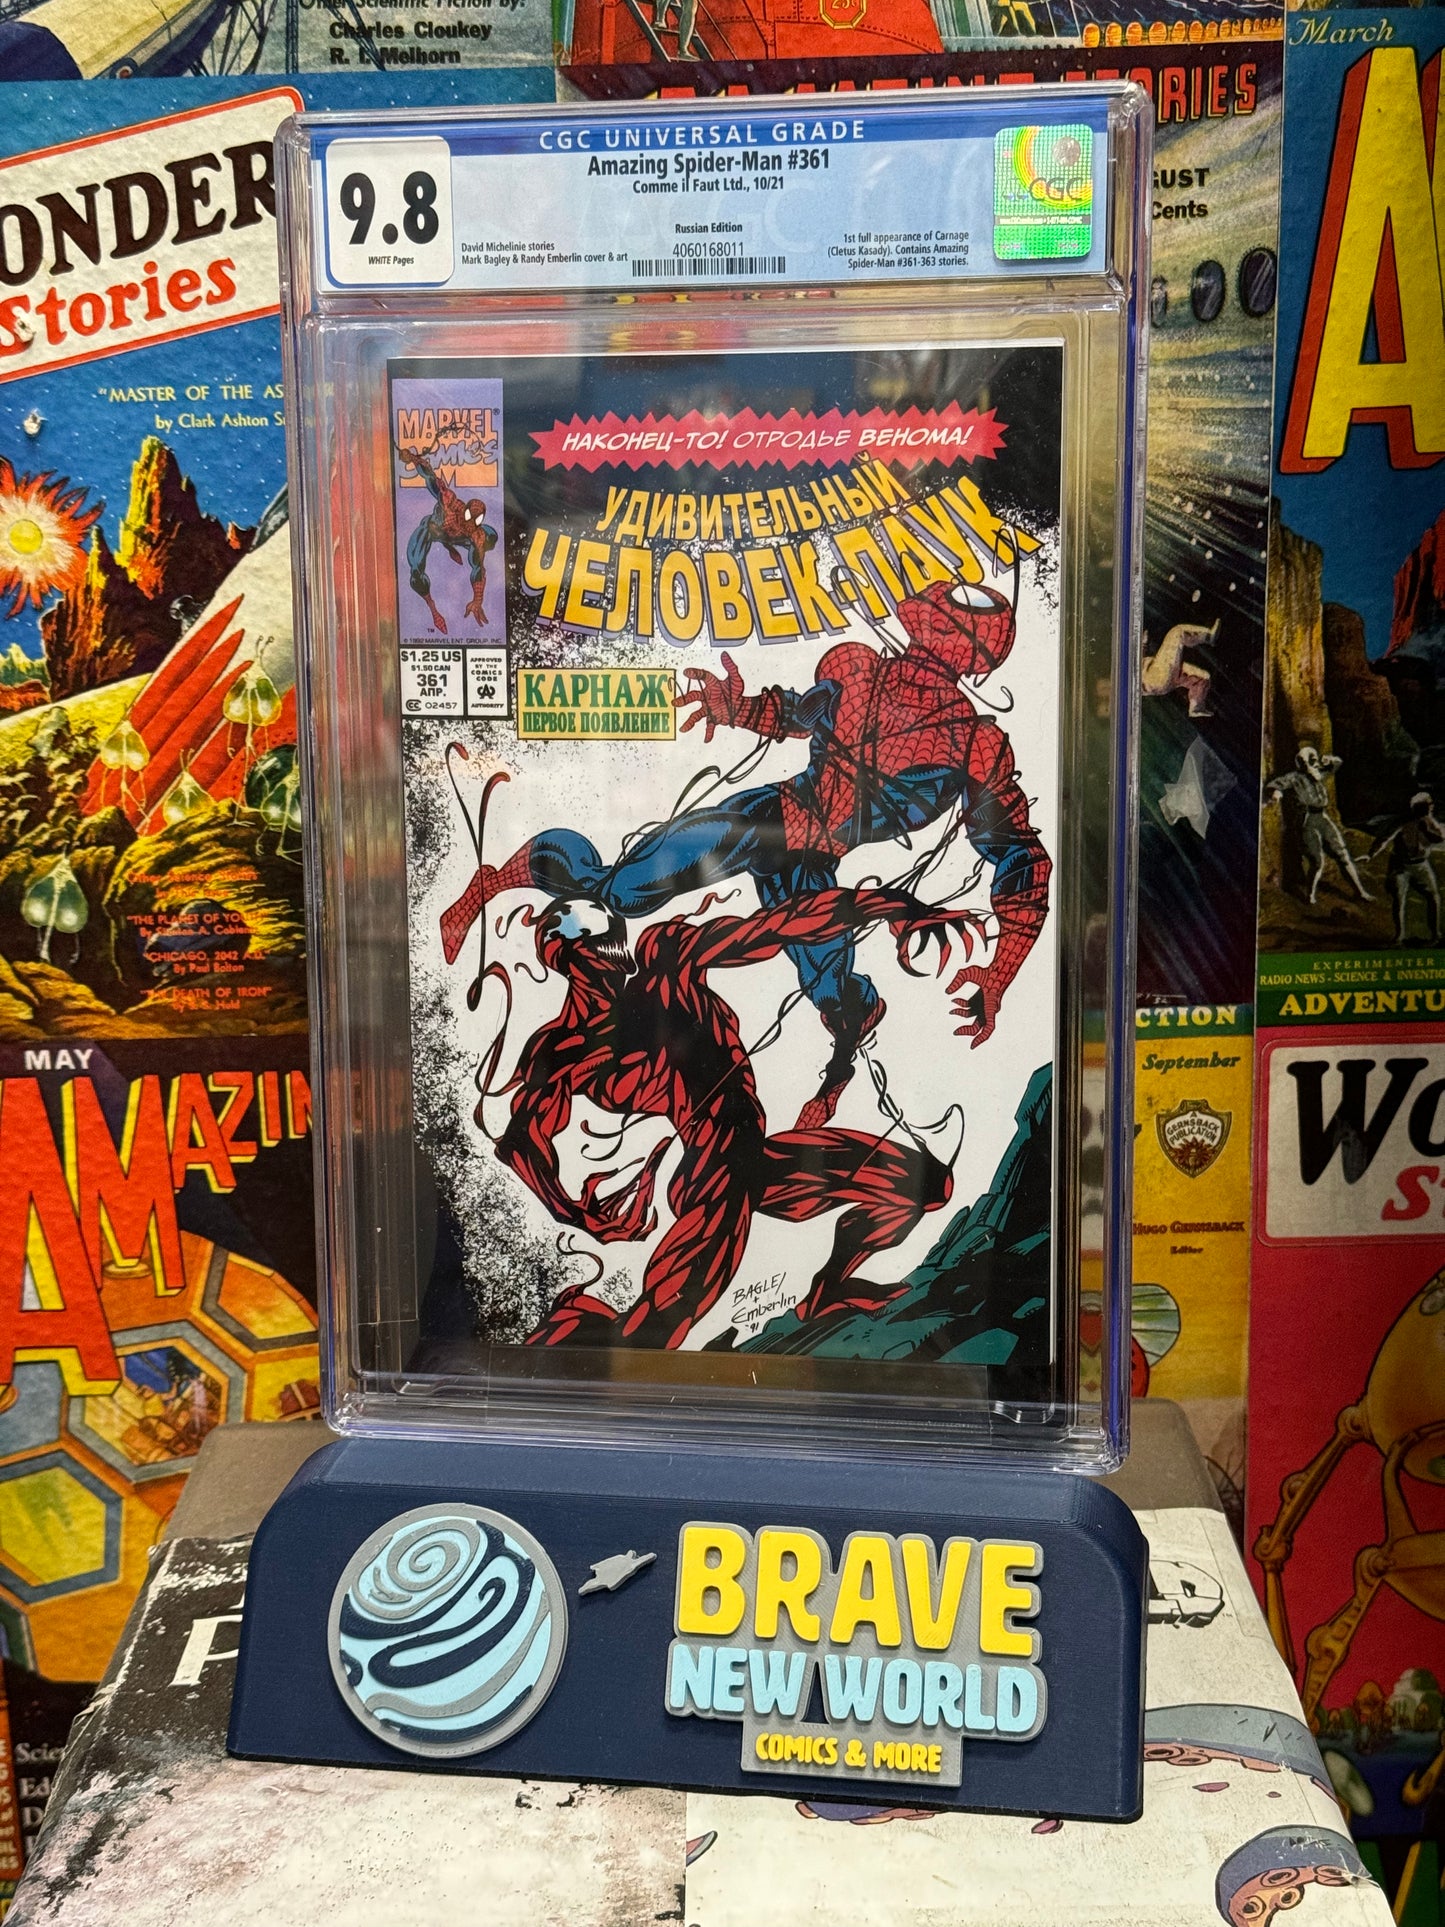 Amazing Spiderman #361 Comme il Faut Ltd. CGC Graded 9.8 Russian Edition 1st Appearance Carnage